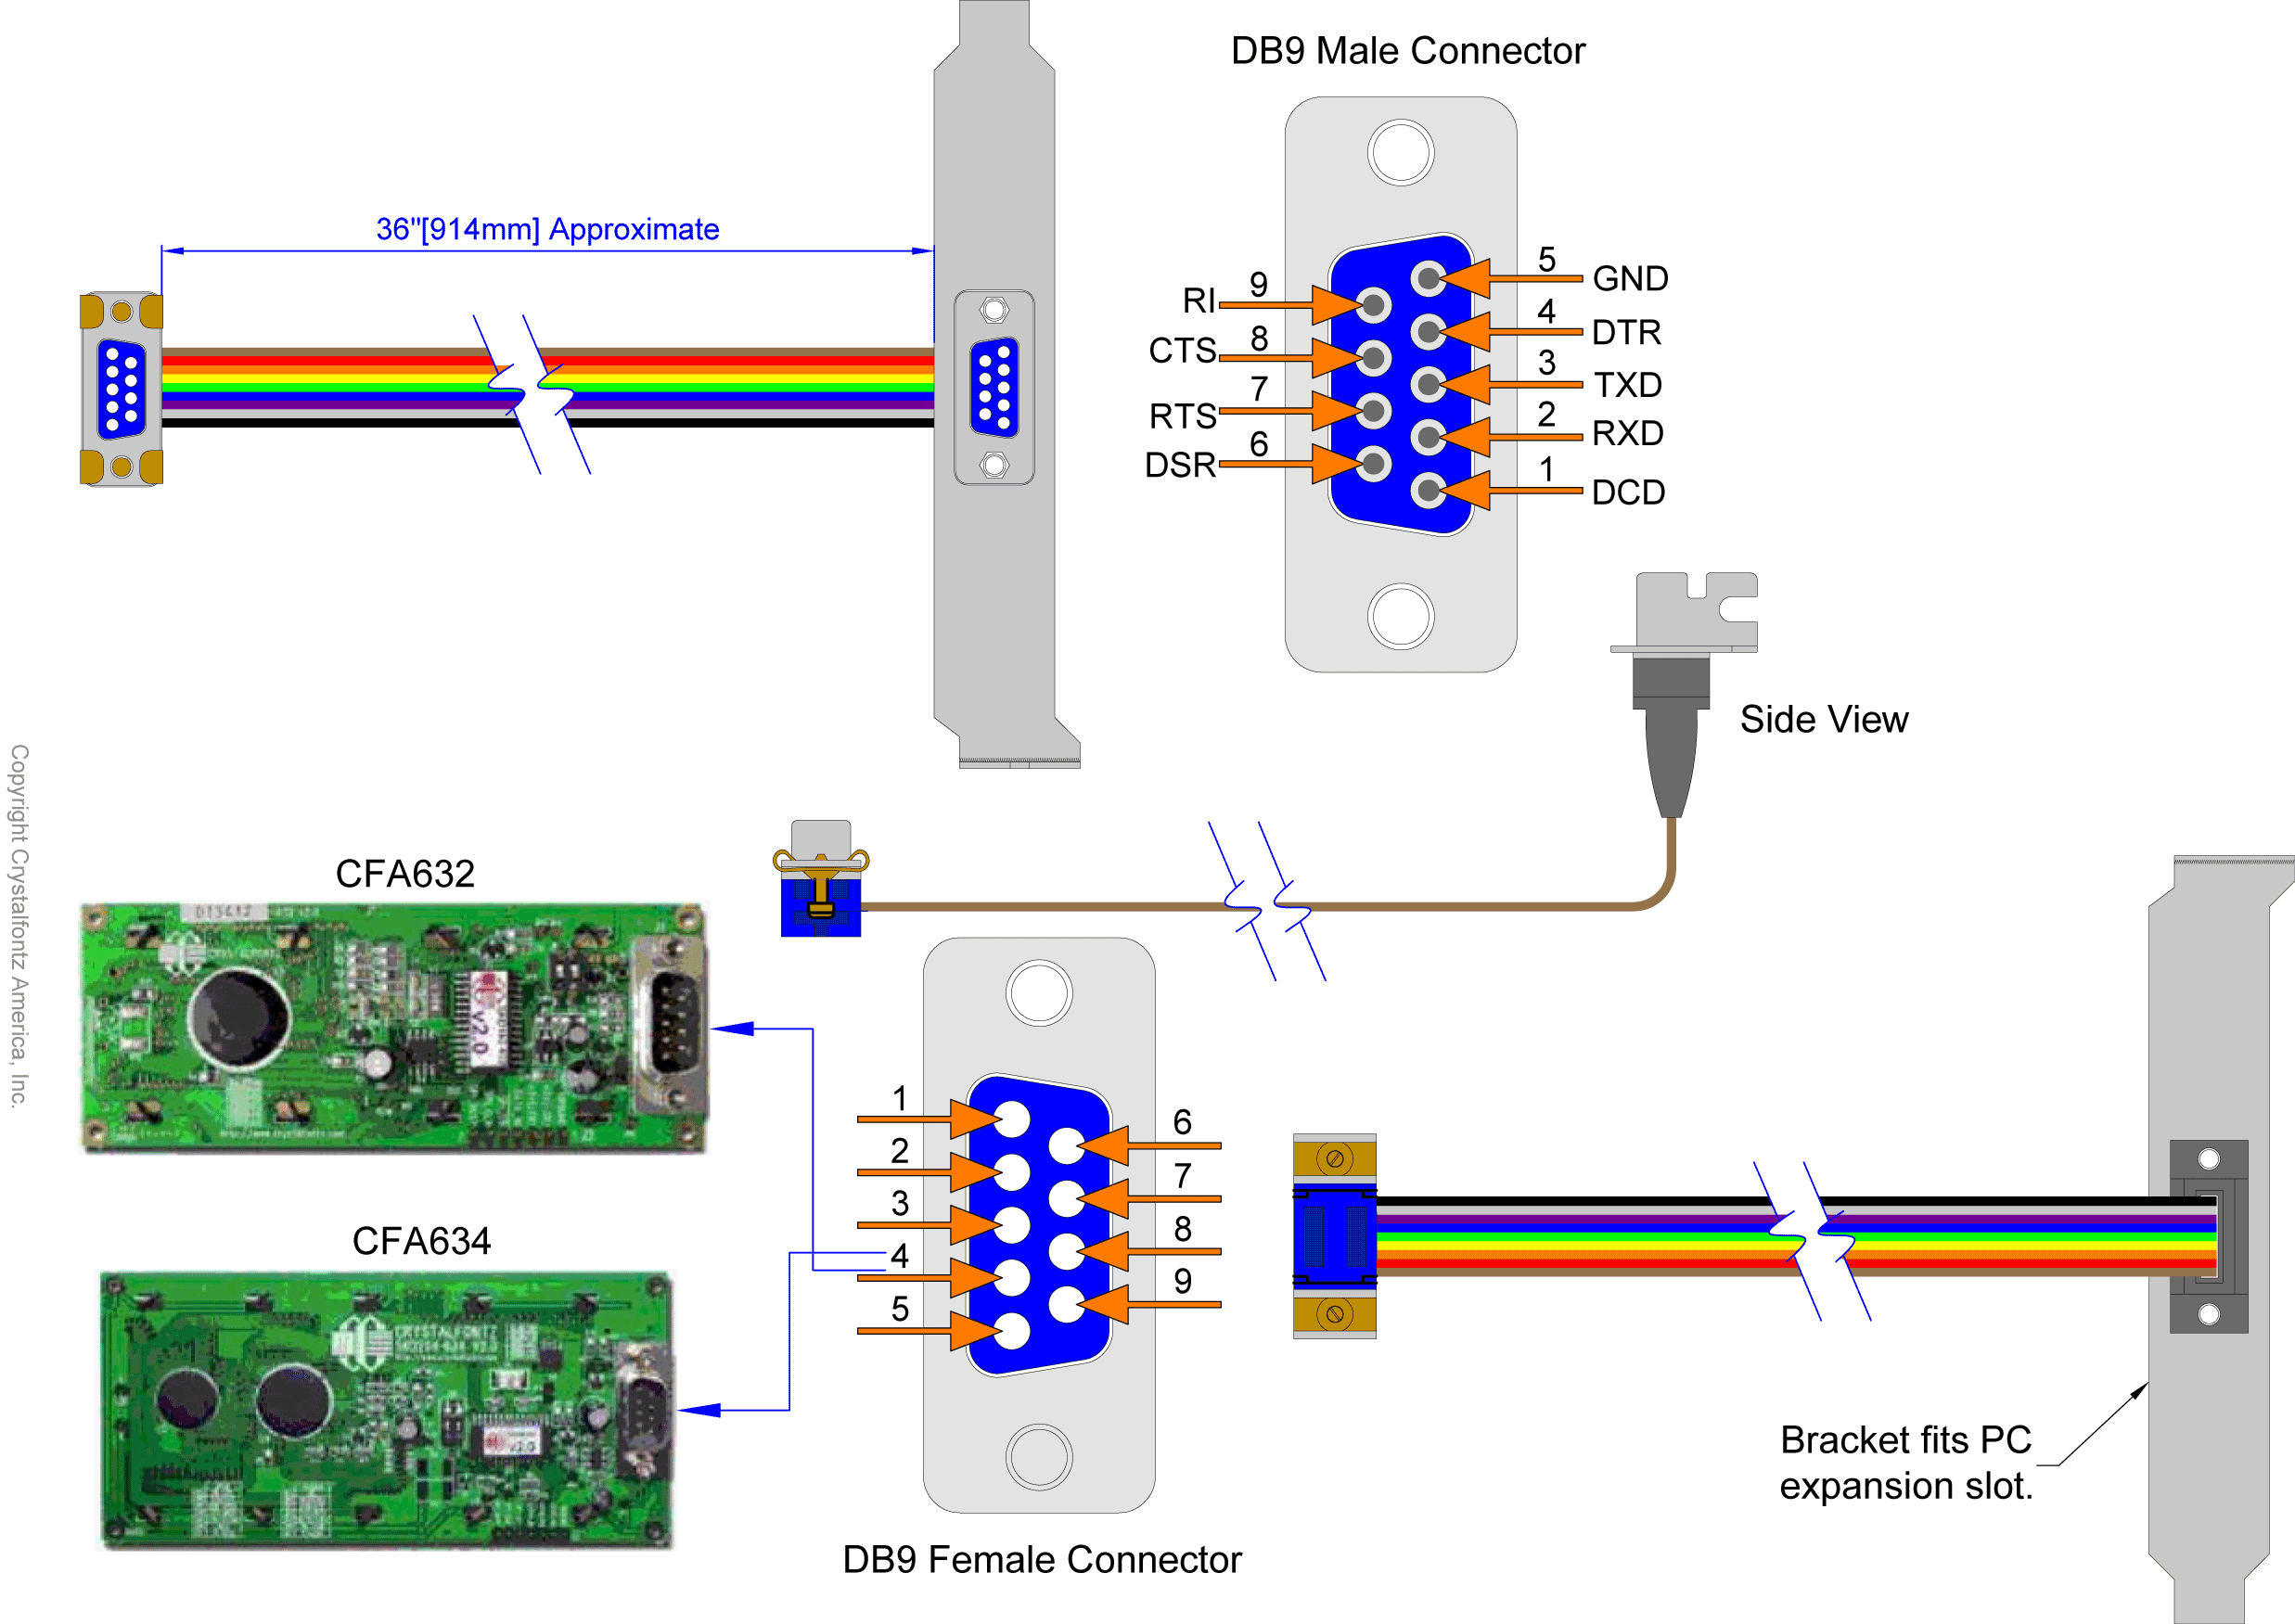 Arsenicum 31 Db9 Female Connector Drawing